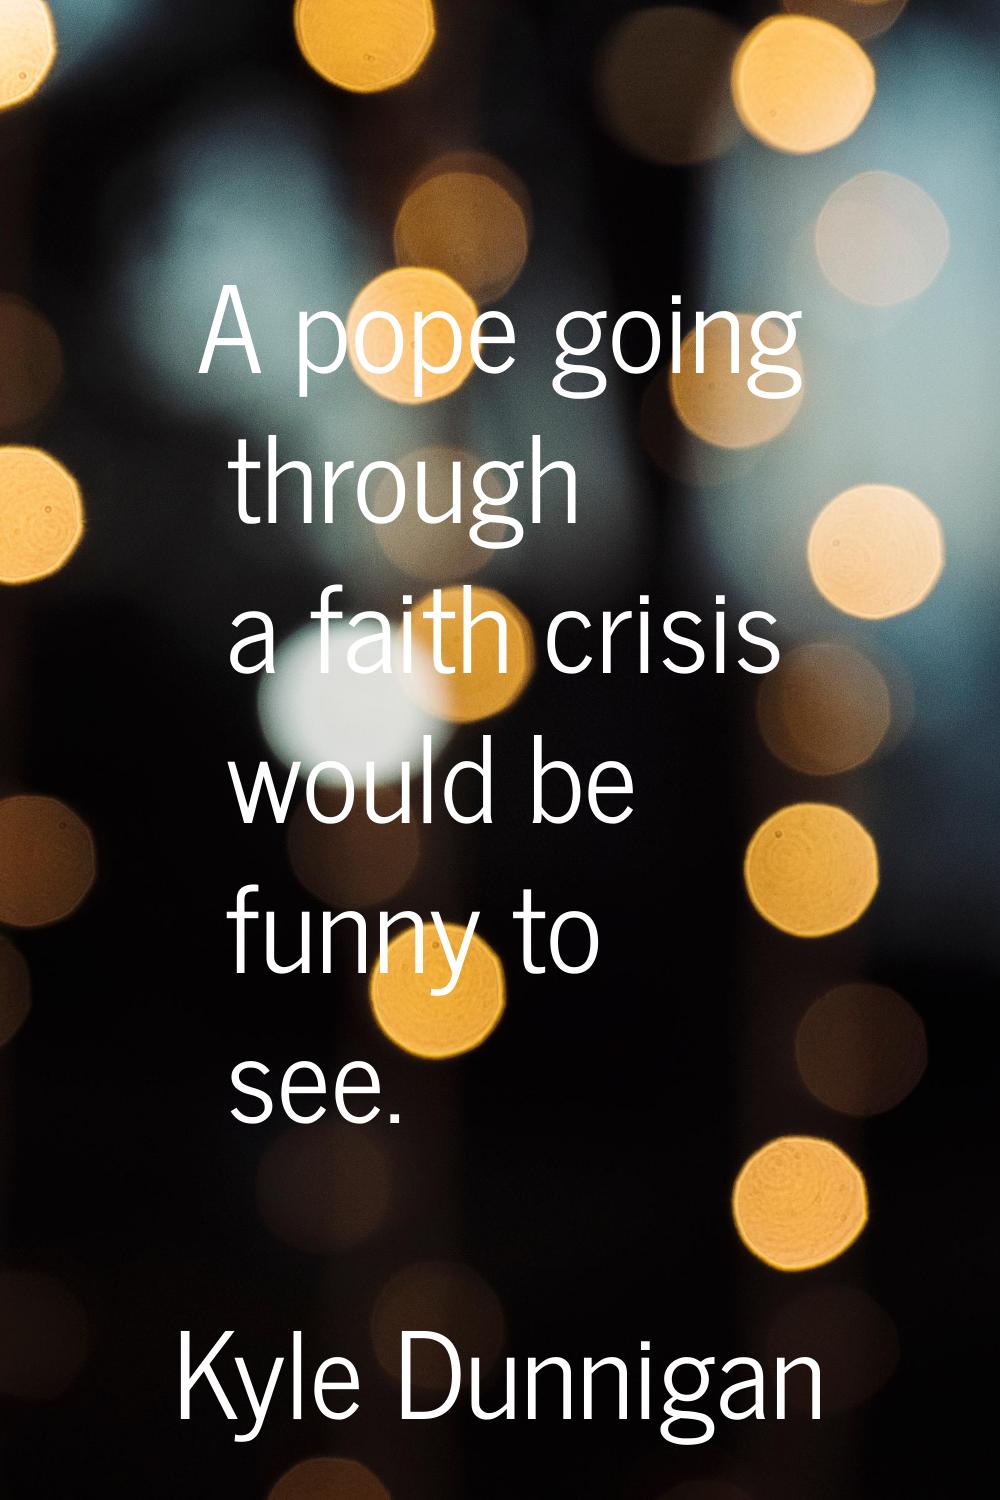 A pope going through a faith crisis would be funny to see.